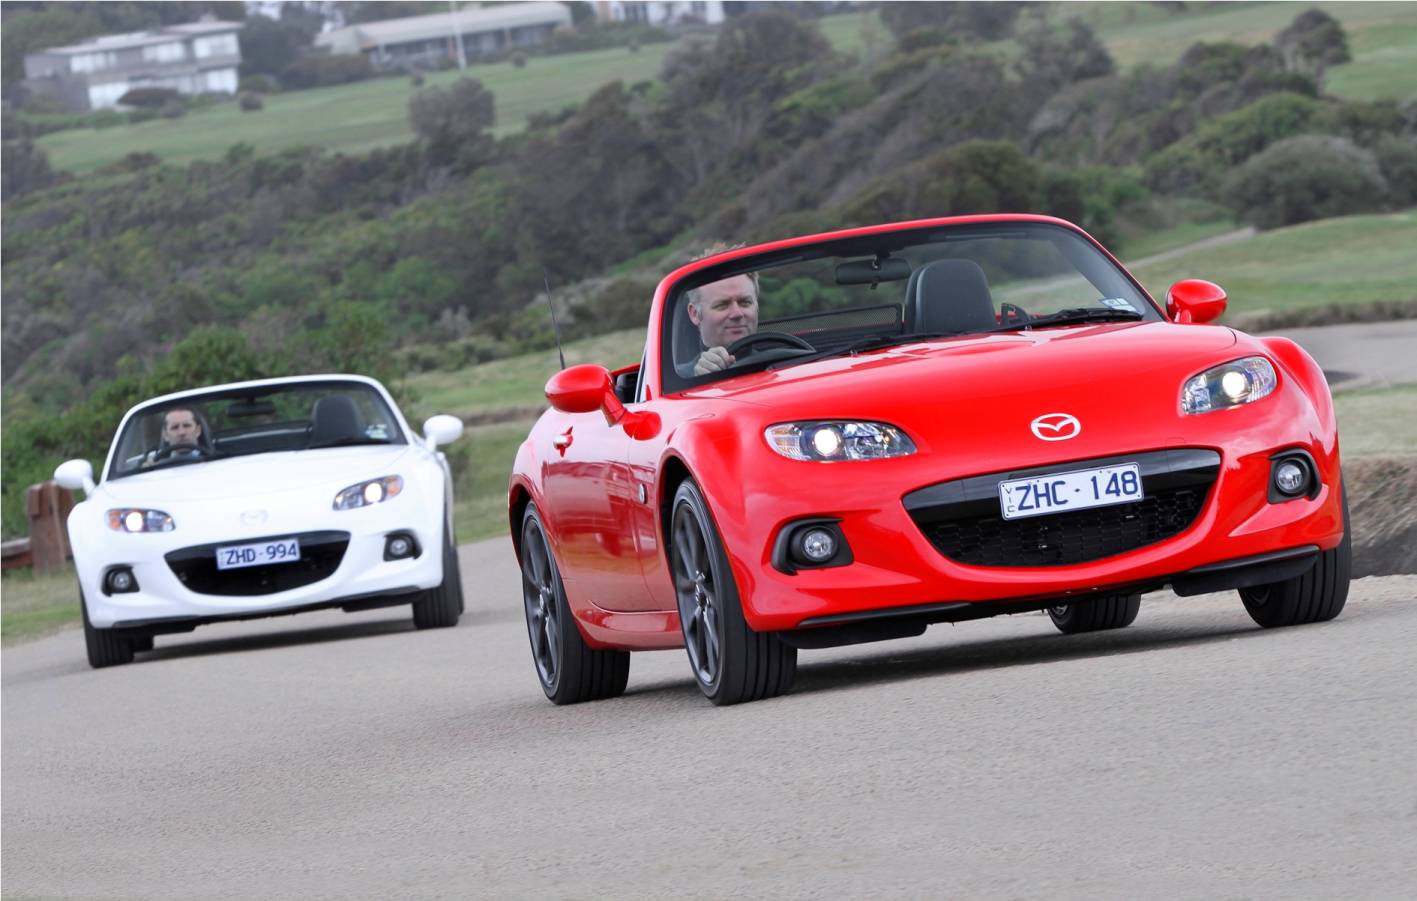 2015 Mazda MX-5 to come with 1.5L engine